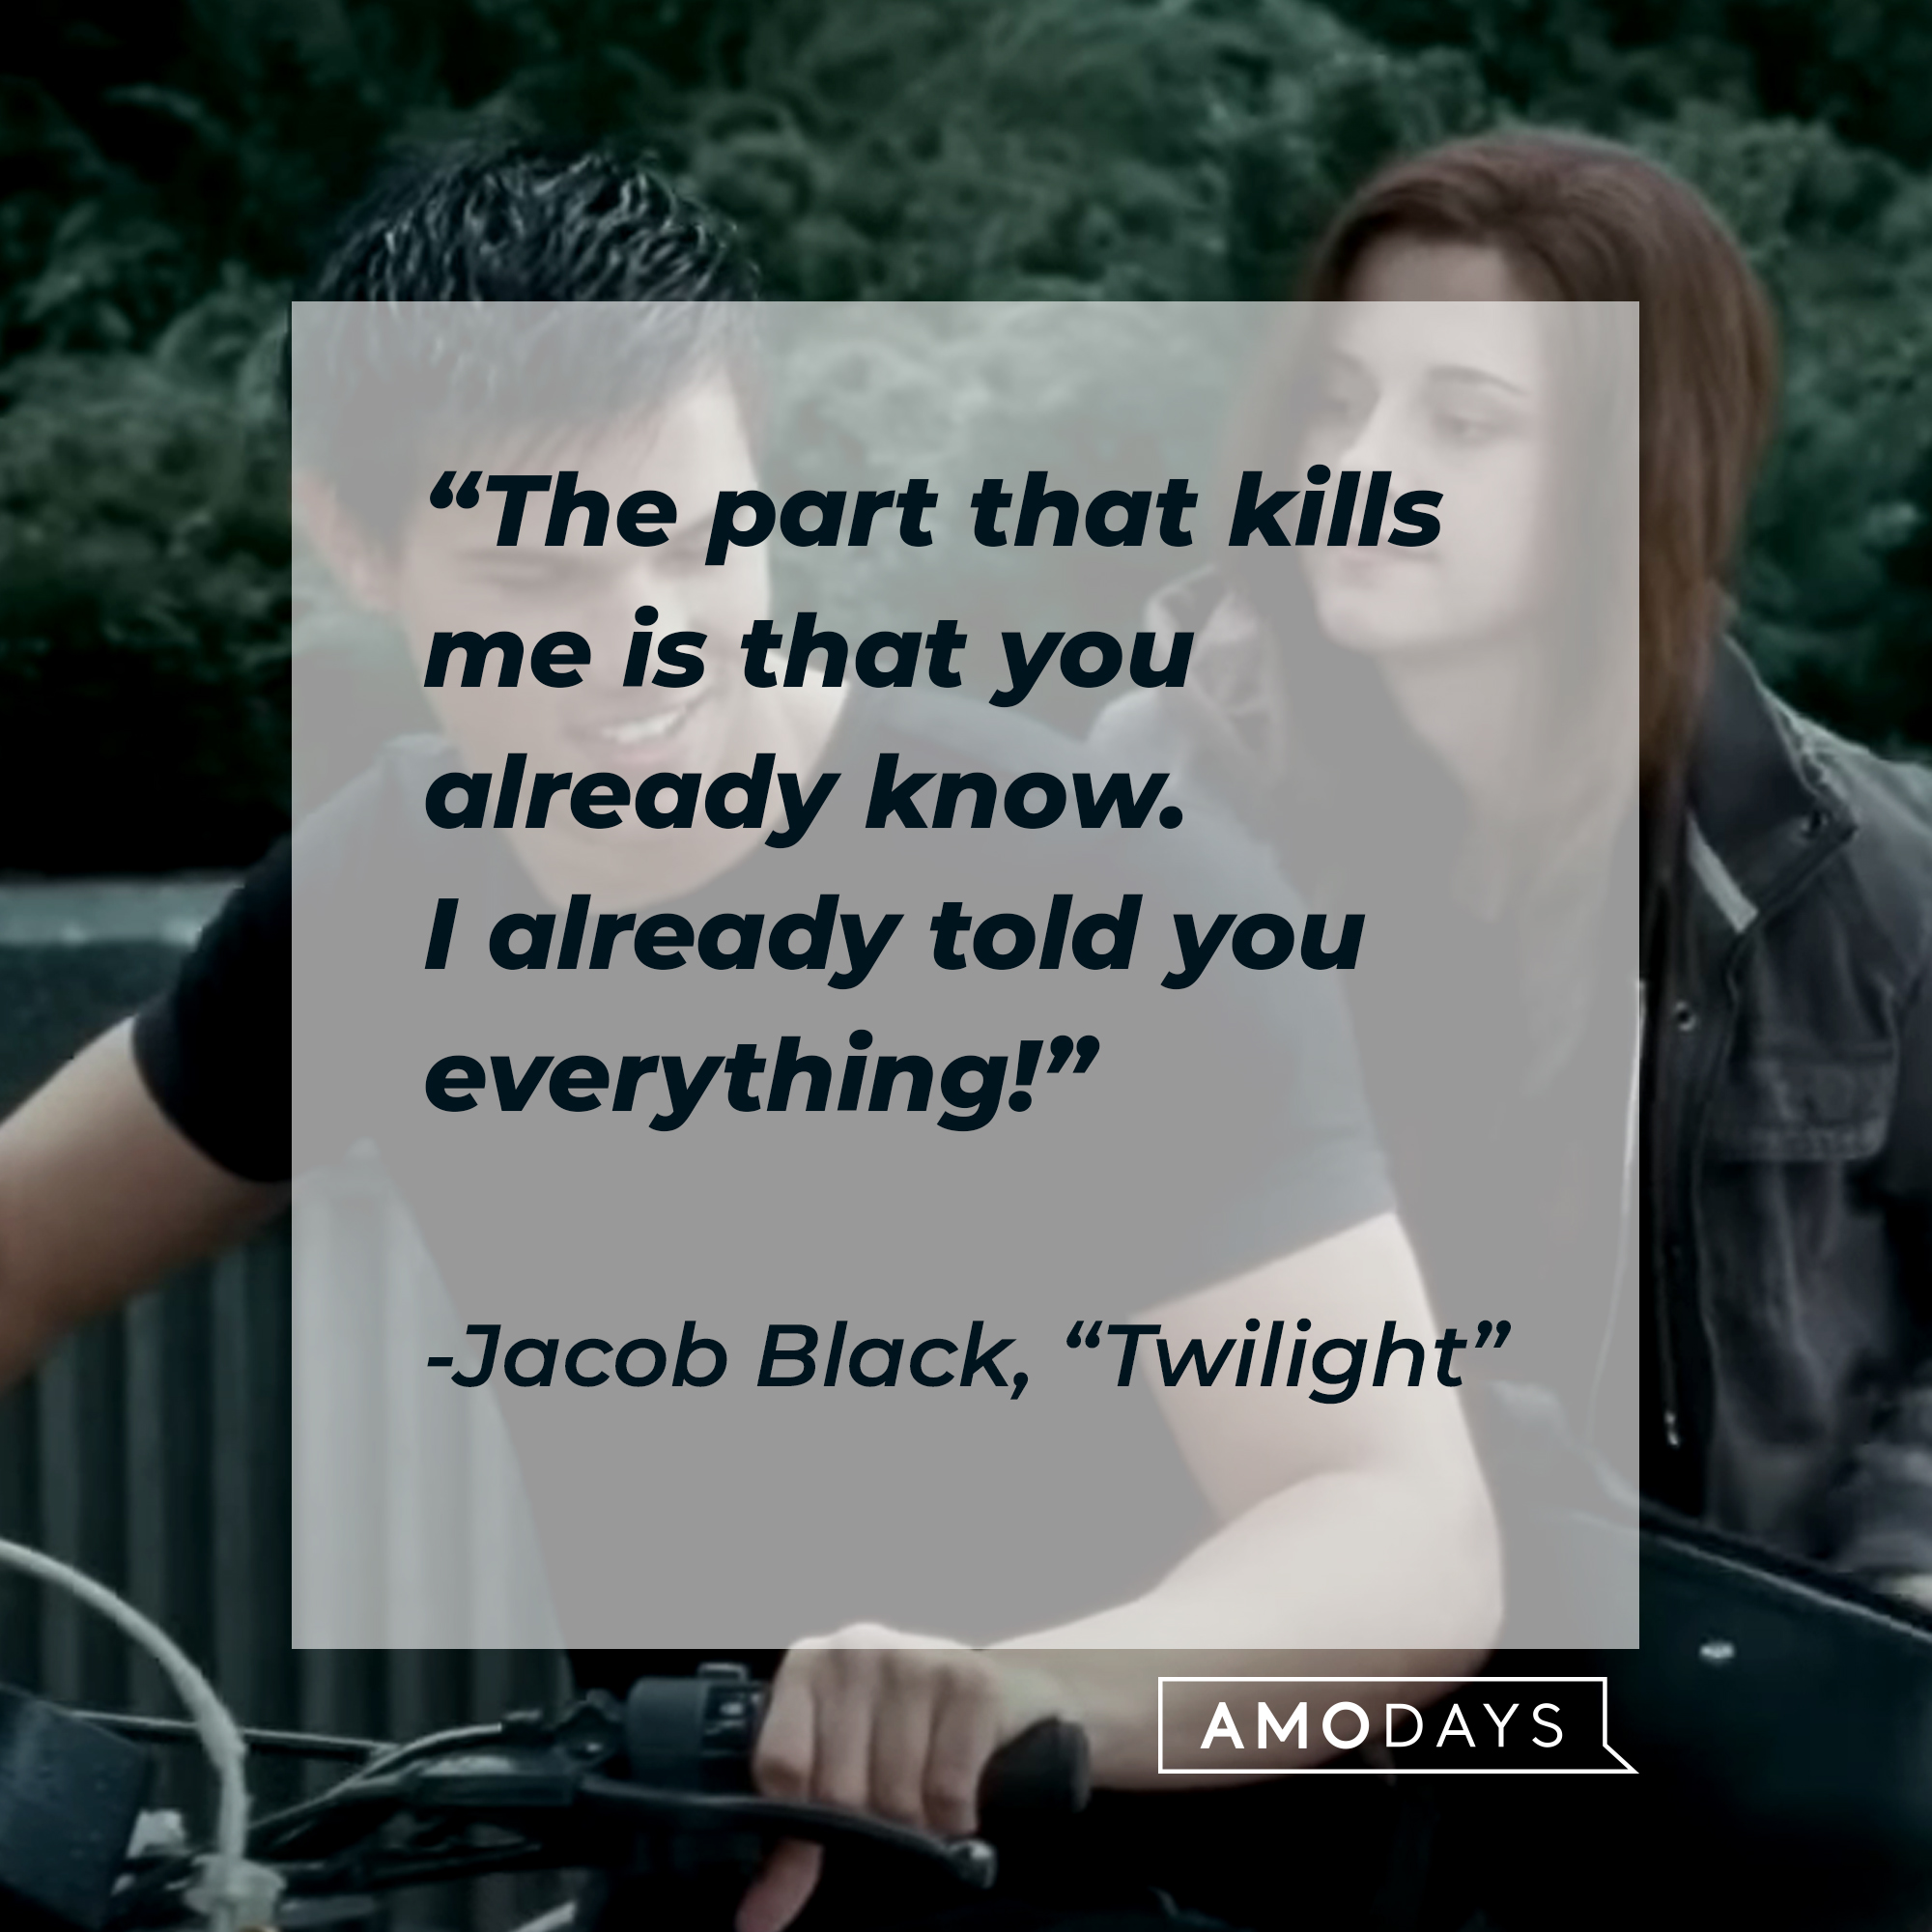 Image of Jacob Black with his quote in "Twilight:" “The part that kills me is that you already know. I already told you everything!” | Source: Facebook.com/twilight